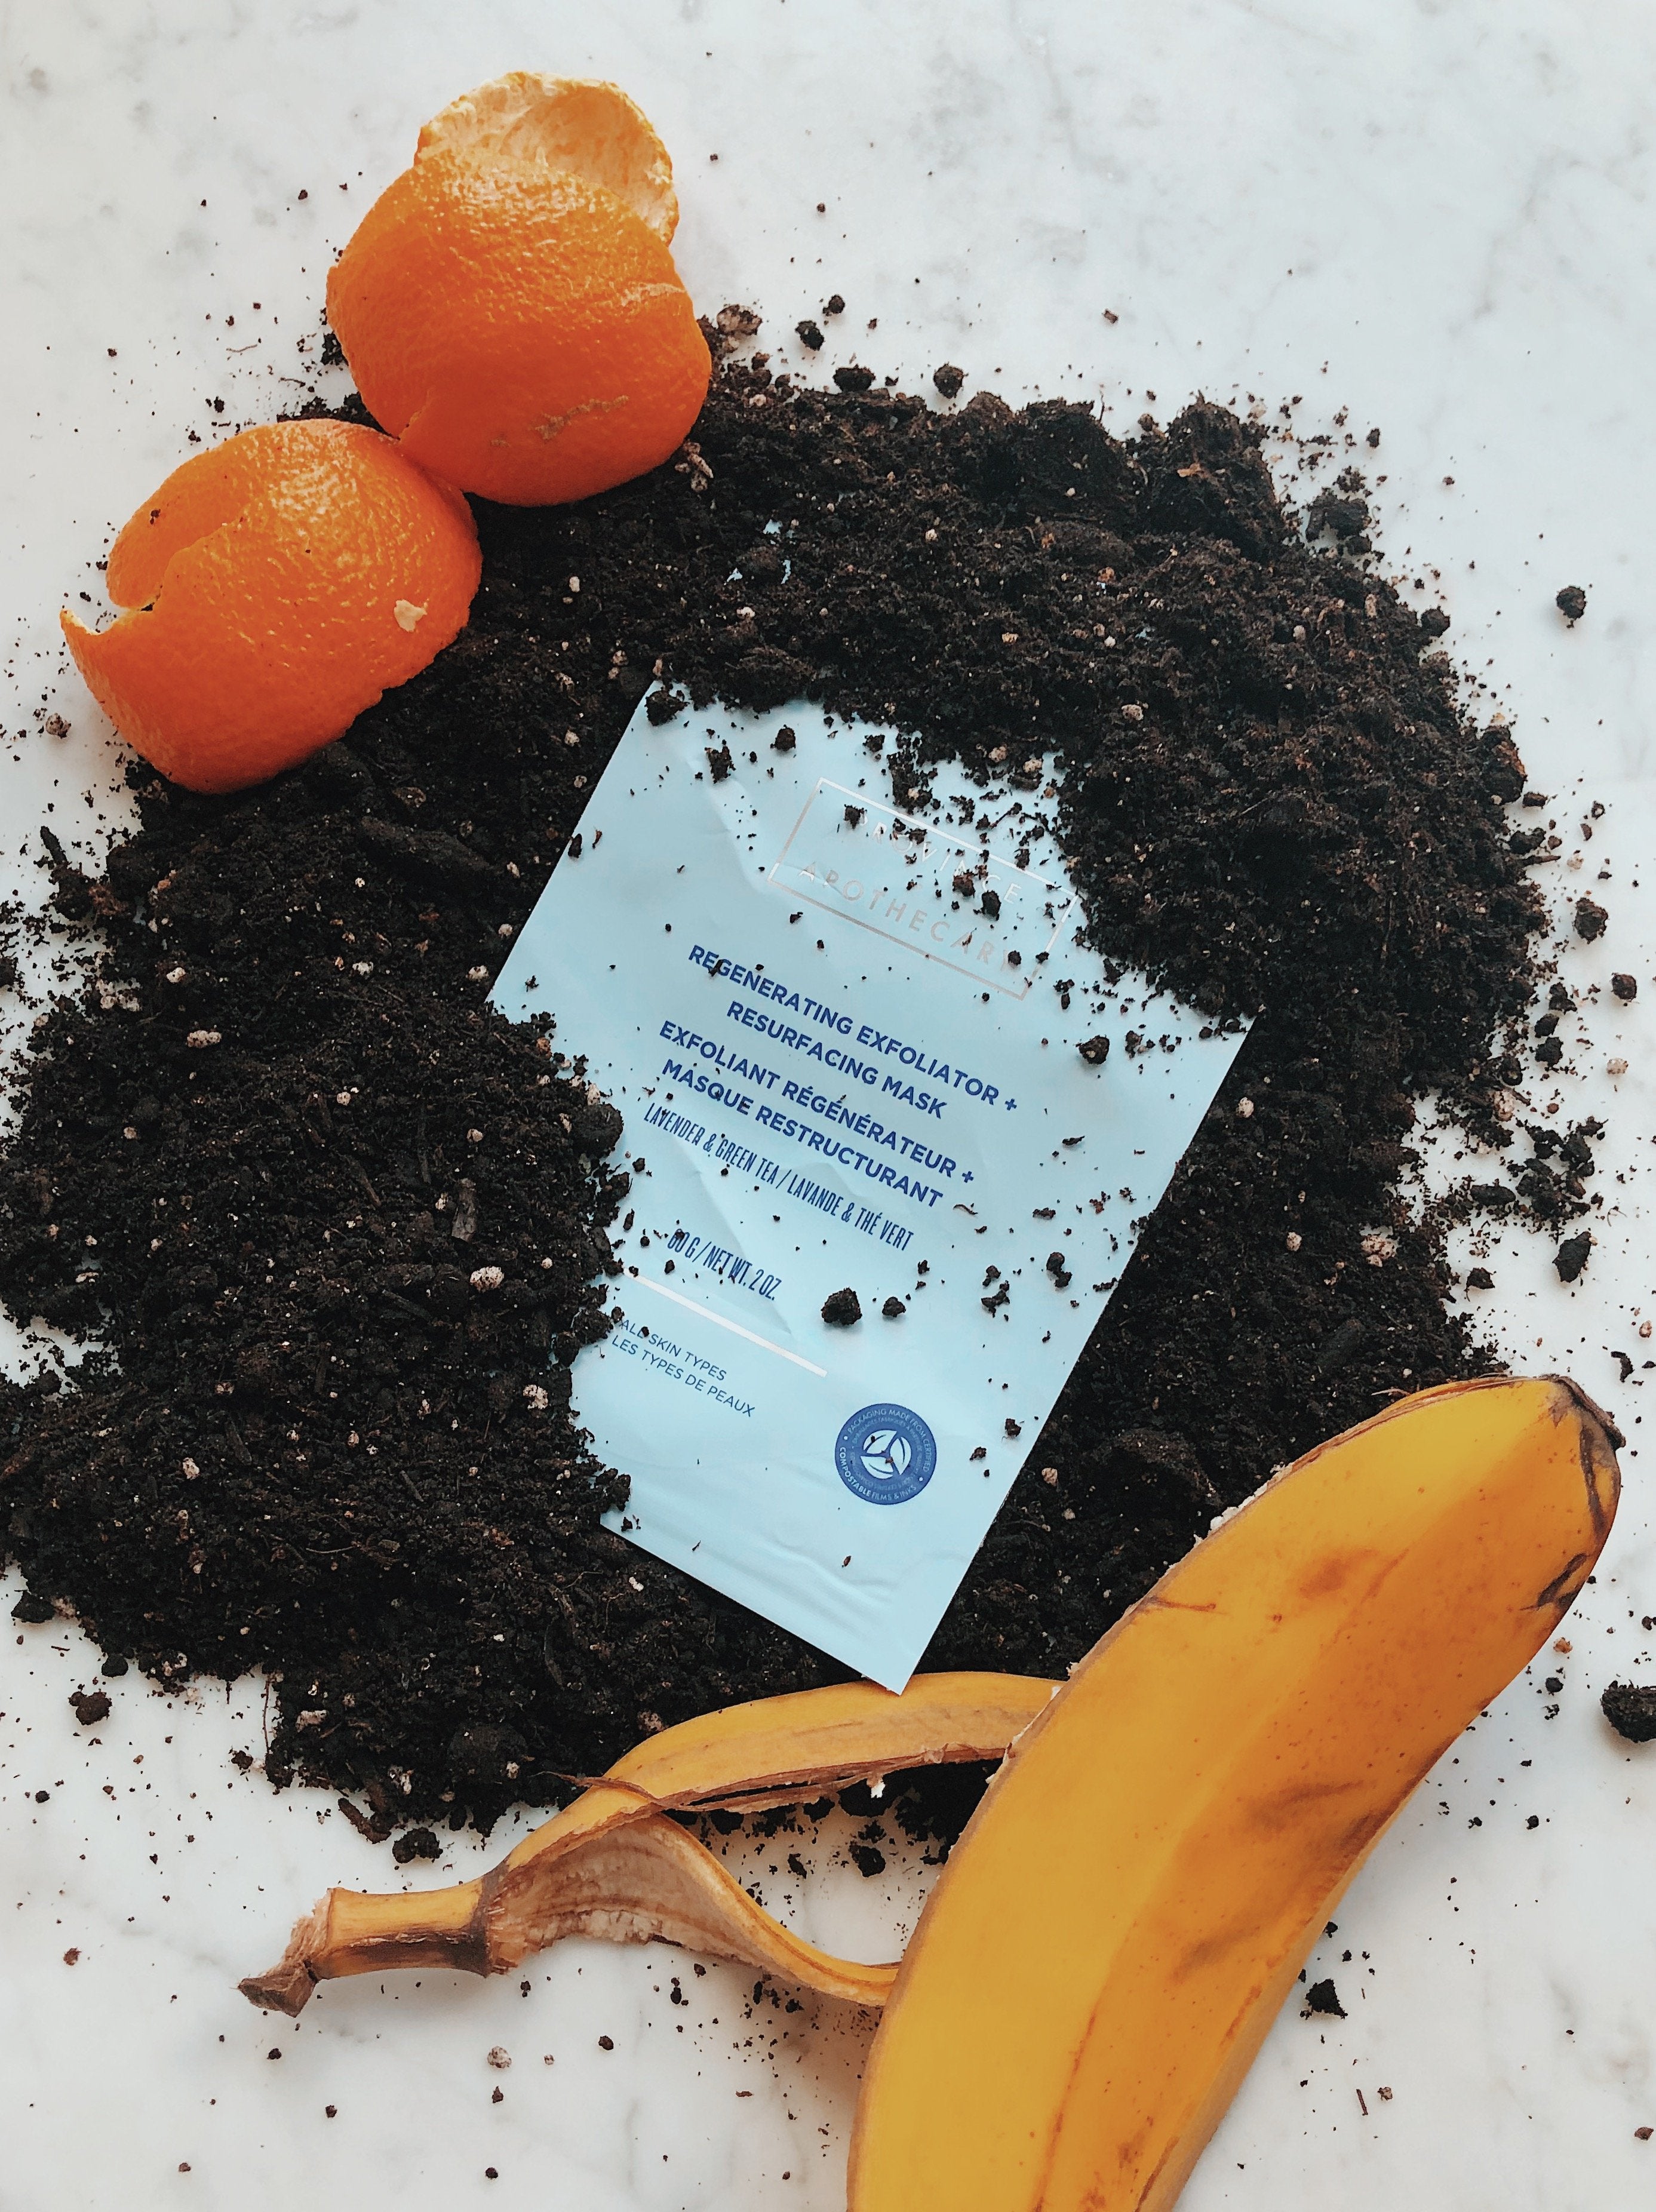 Province Apothecary compostable packaging shown with dirt, a banana peel and the skin of an orange.